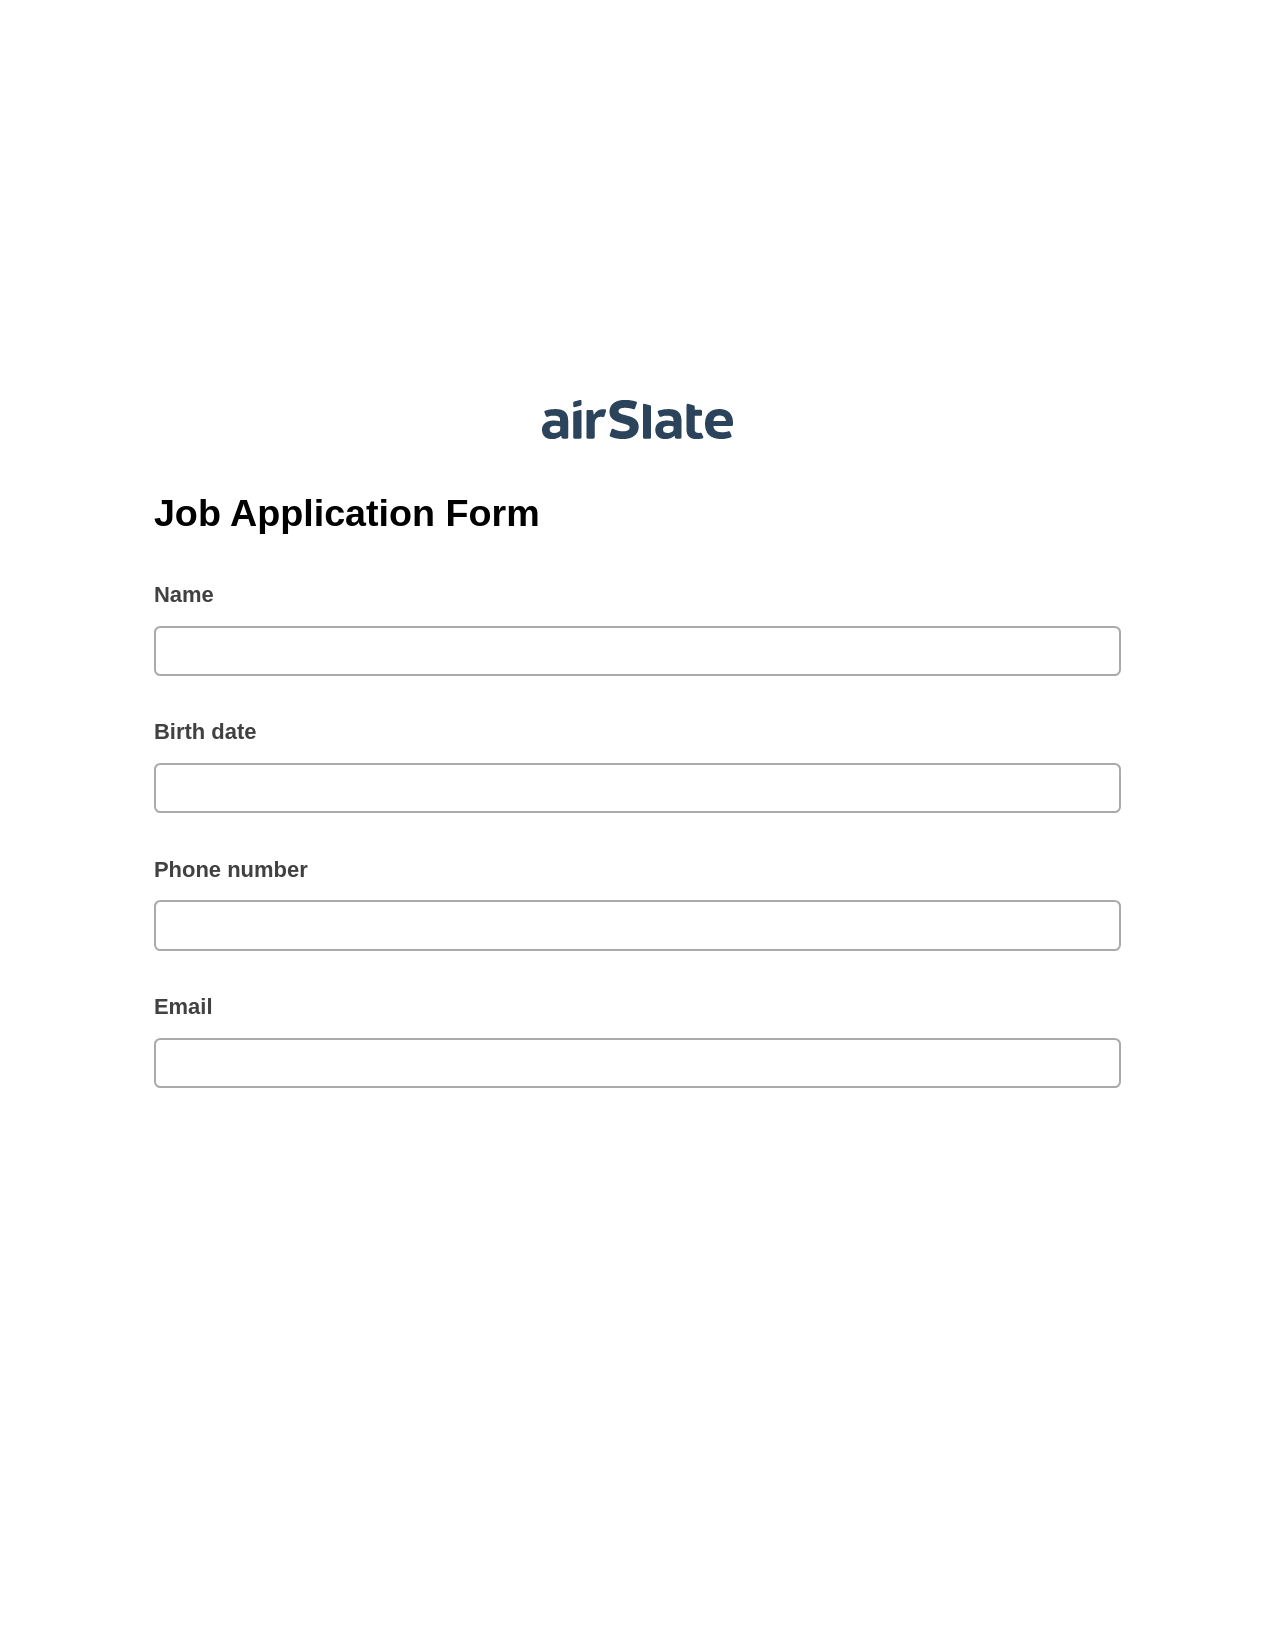 Multirole Job Application Form Pre-fill from Salesforce Record Bot, Export to MS Dynamics 365 Bot, OneDrive Bot